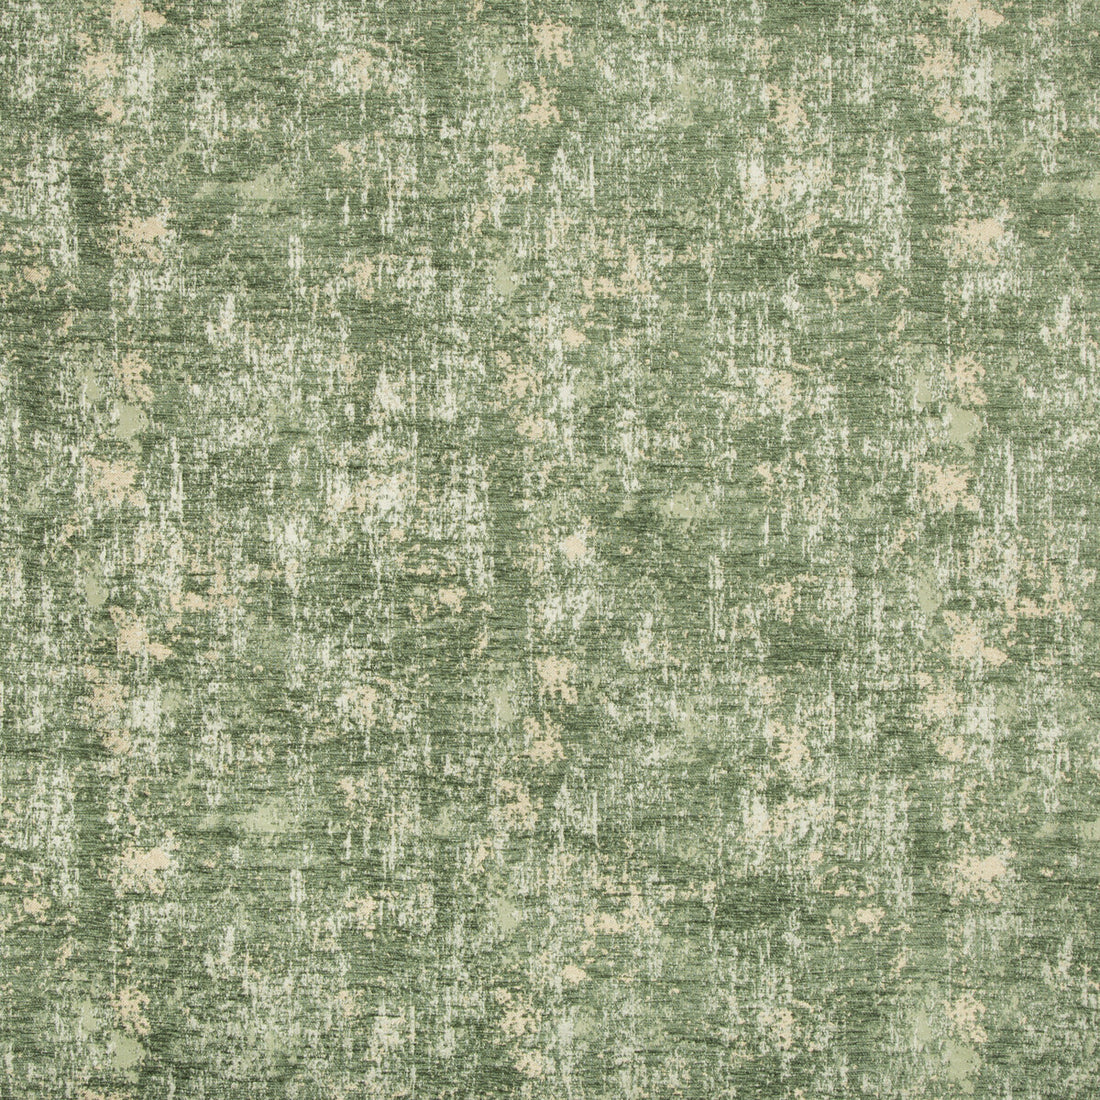 Les Ecorces Woven fabric in emerald color - pattern 8017130.53.0 - by Brunschwig &amp; Fils in the Les Ensembliers collection